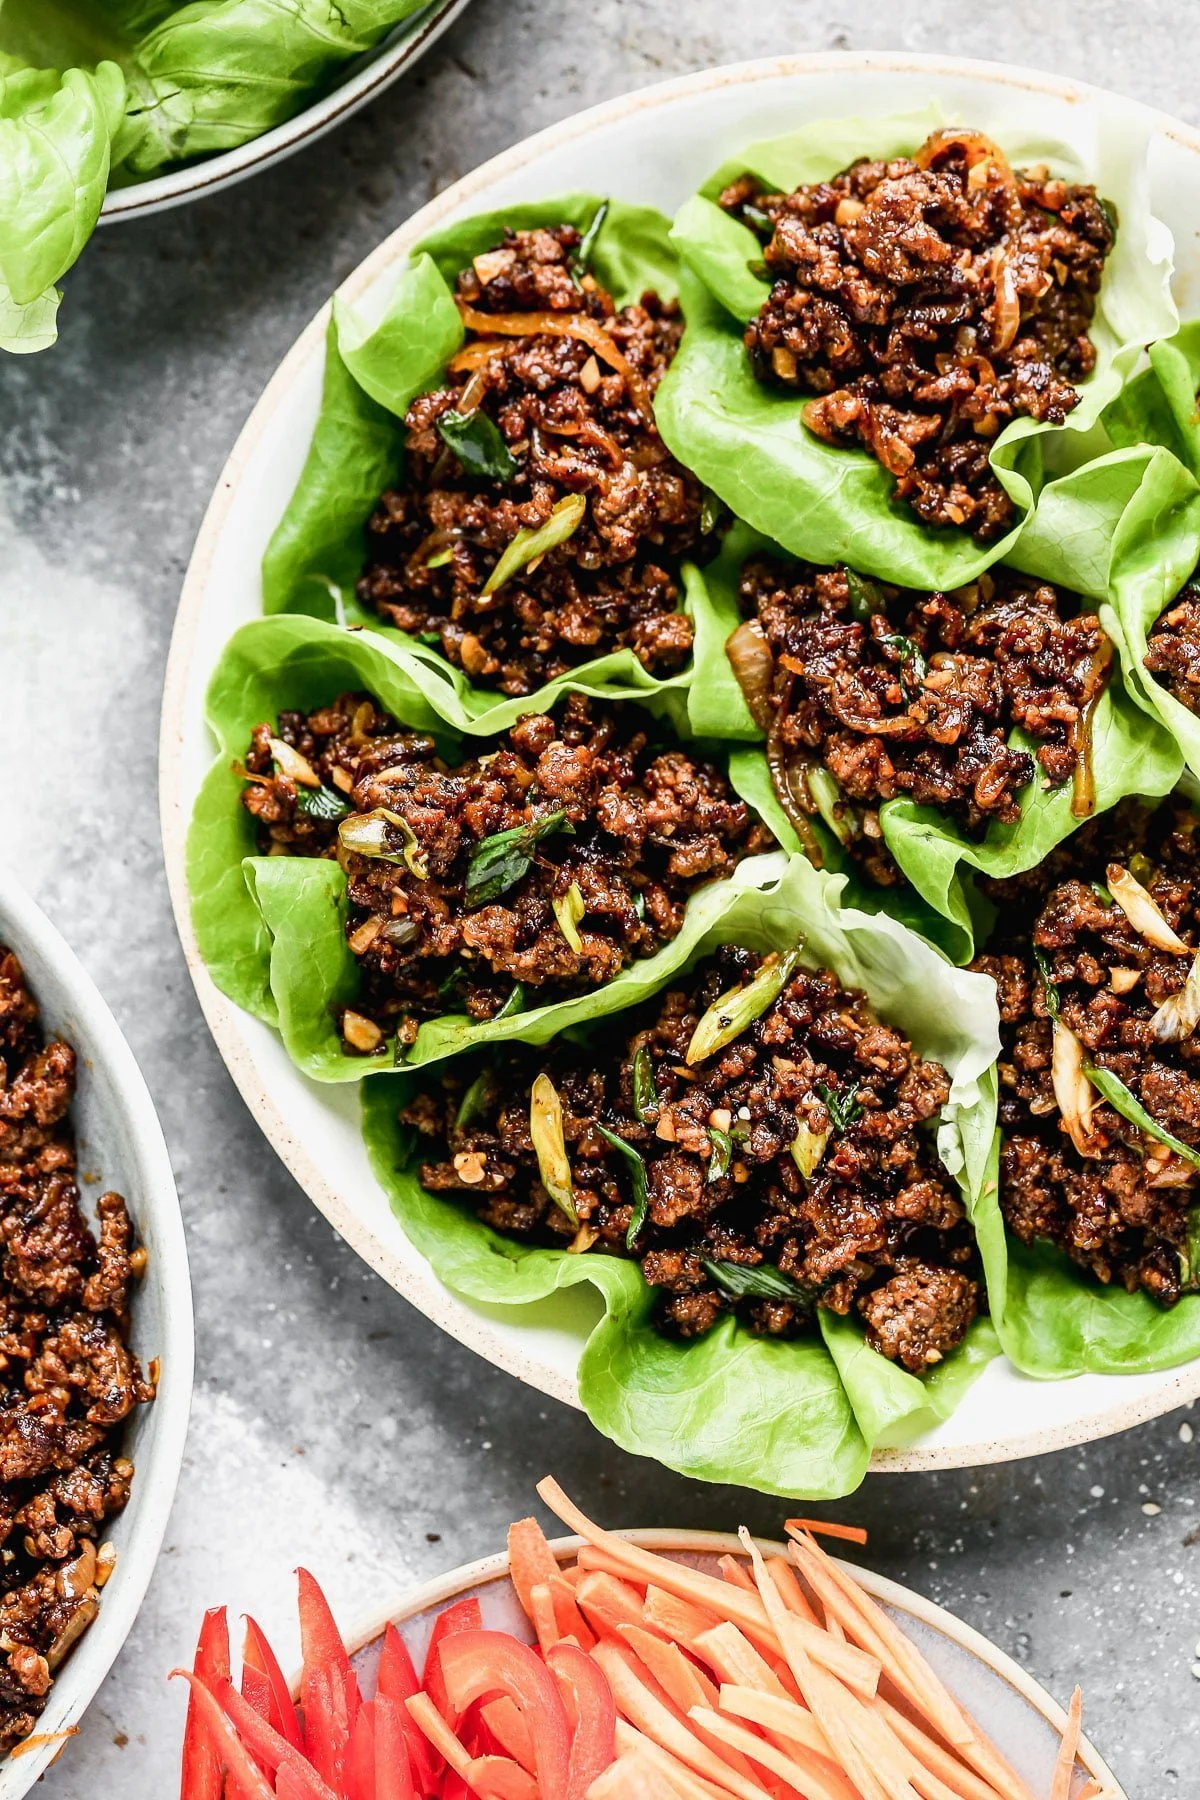 Ultra crispy and smothered in a soy-based sauce studded with rich brown sugar, sweet mirin wine, and brimming with heat from Sambal Oelek, these Beef Lettuce Wraps are my new favorite way to do lettuce. With easy-to-find ingredients, and minimal prep and cook time, they're also the perfect way to get dinner on the table without  much effort. 